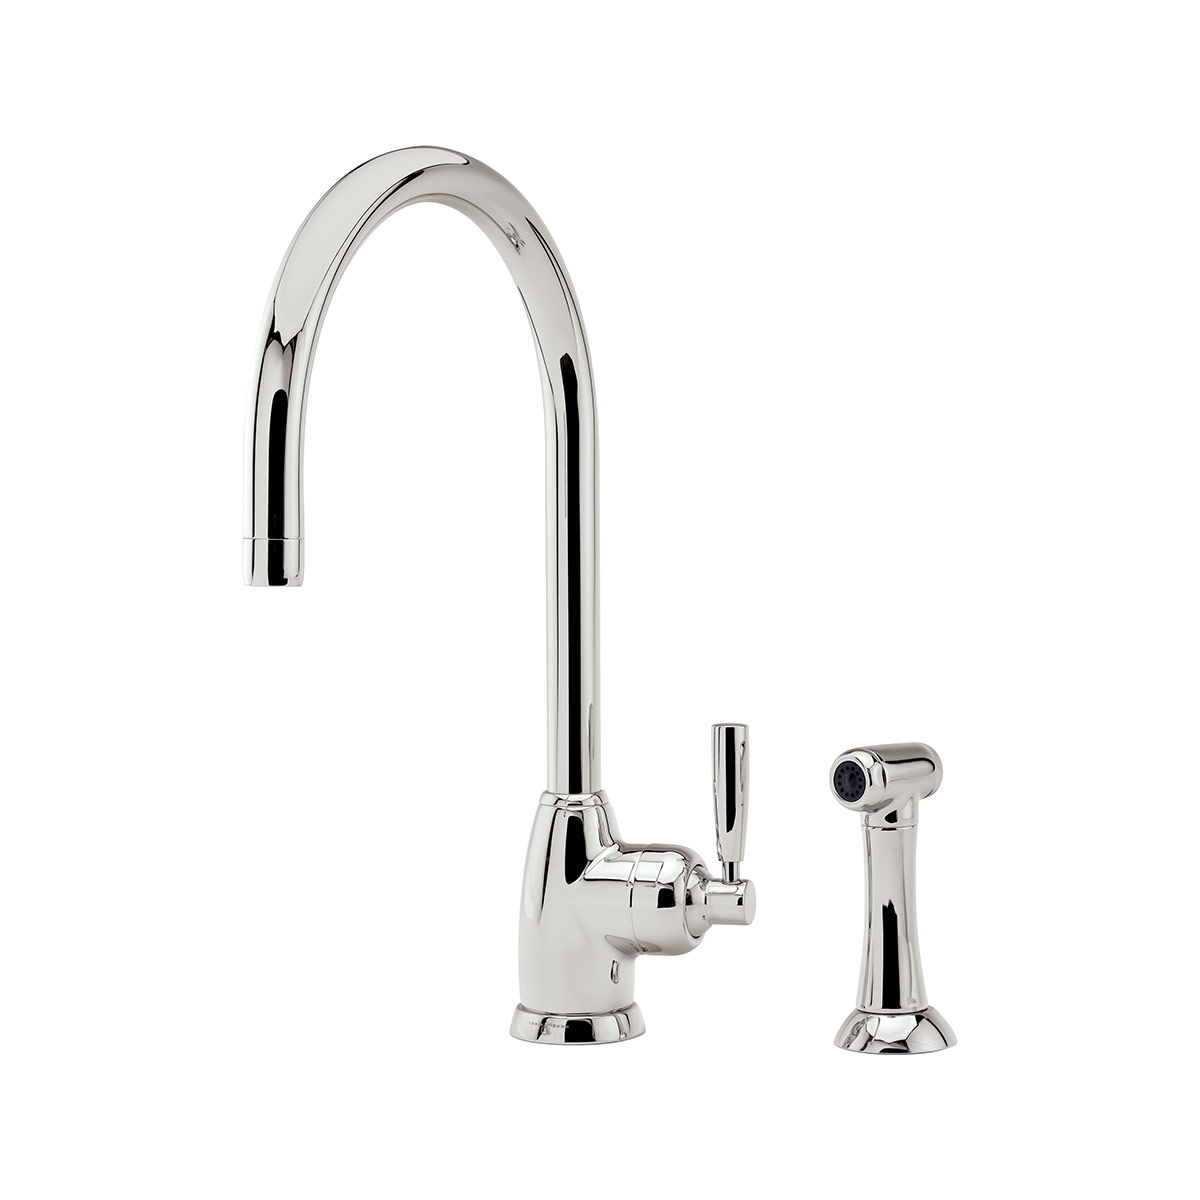 Shaws by Perrin & Rowe Roeburn kitchen mixer with spray rinse in Nickel. Mimas style monobloc kitchen tap AUSH.4846. Distributed in Australia by Luxe by Design, Brisbane.